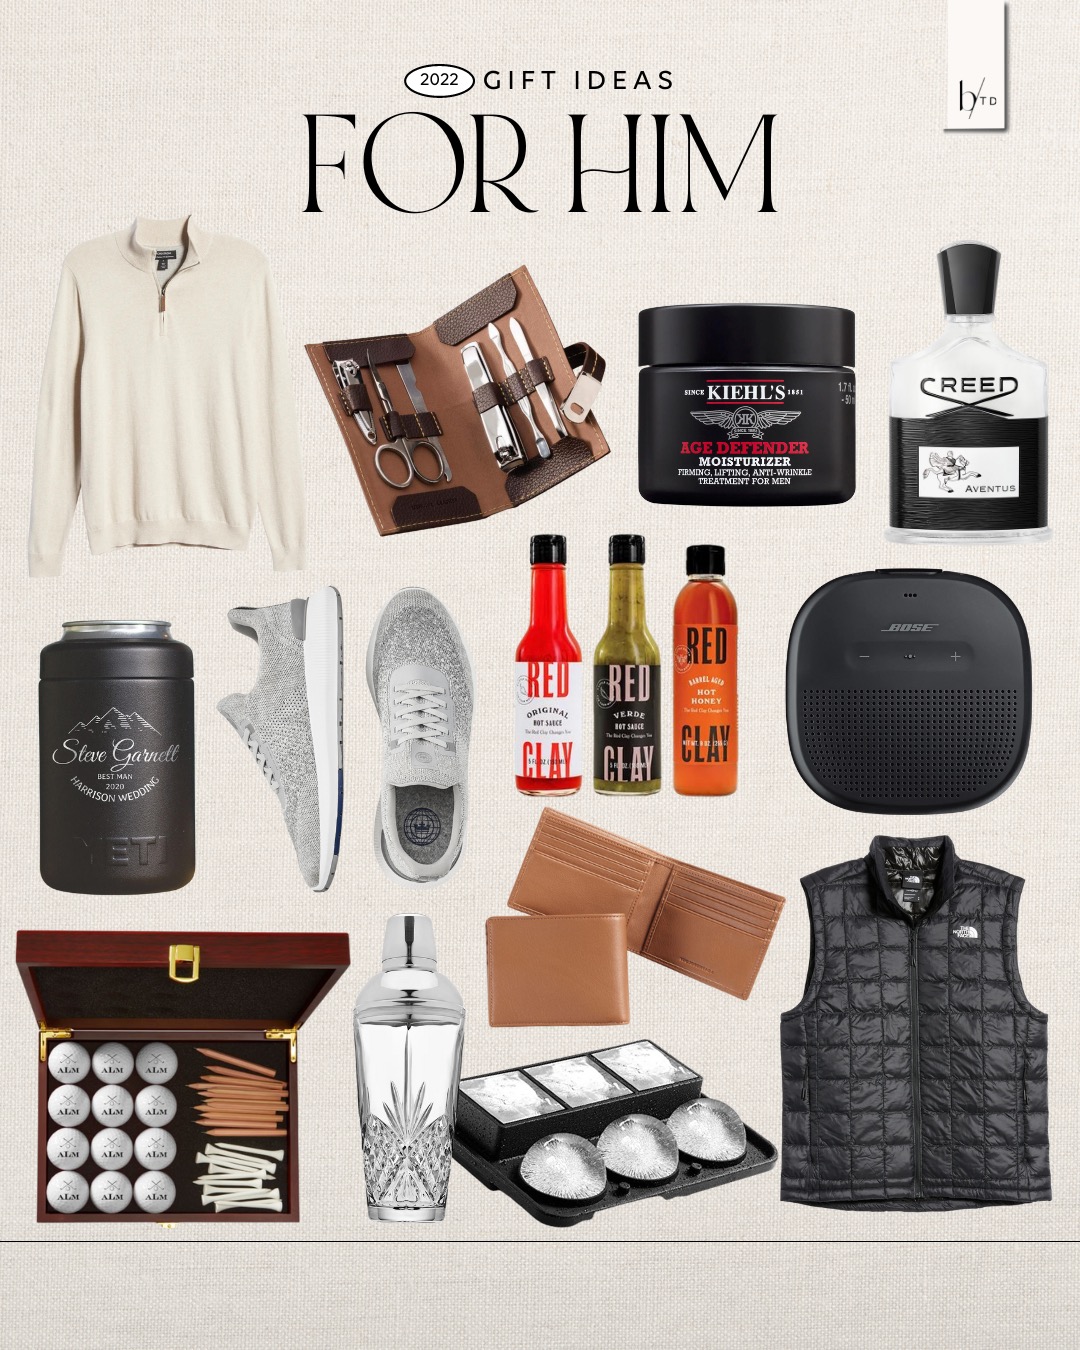 Gift Guide for Men 2022 - A Thoughtful Place